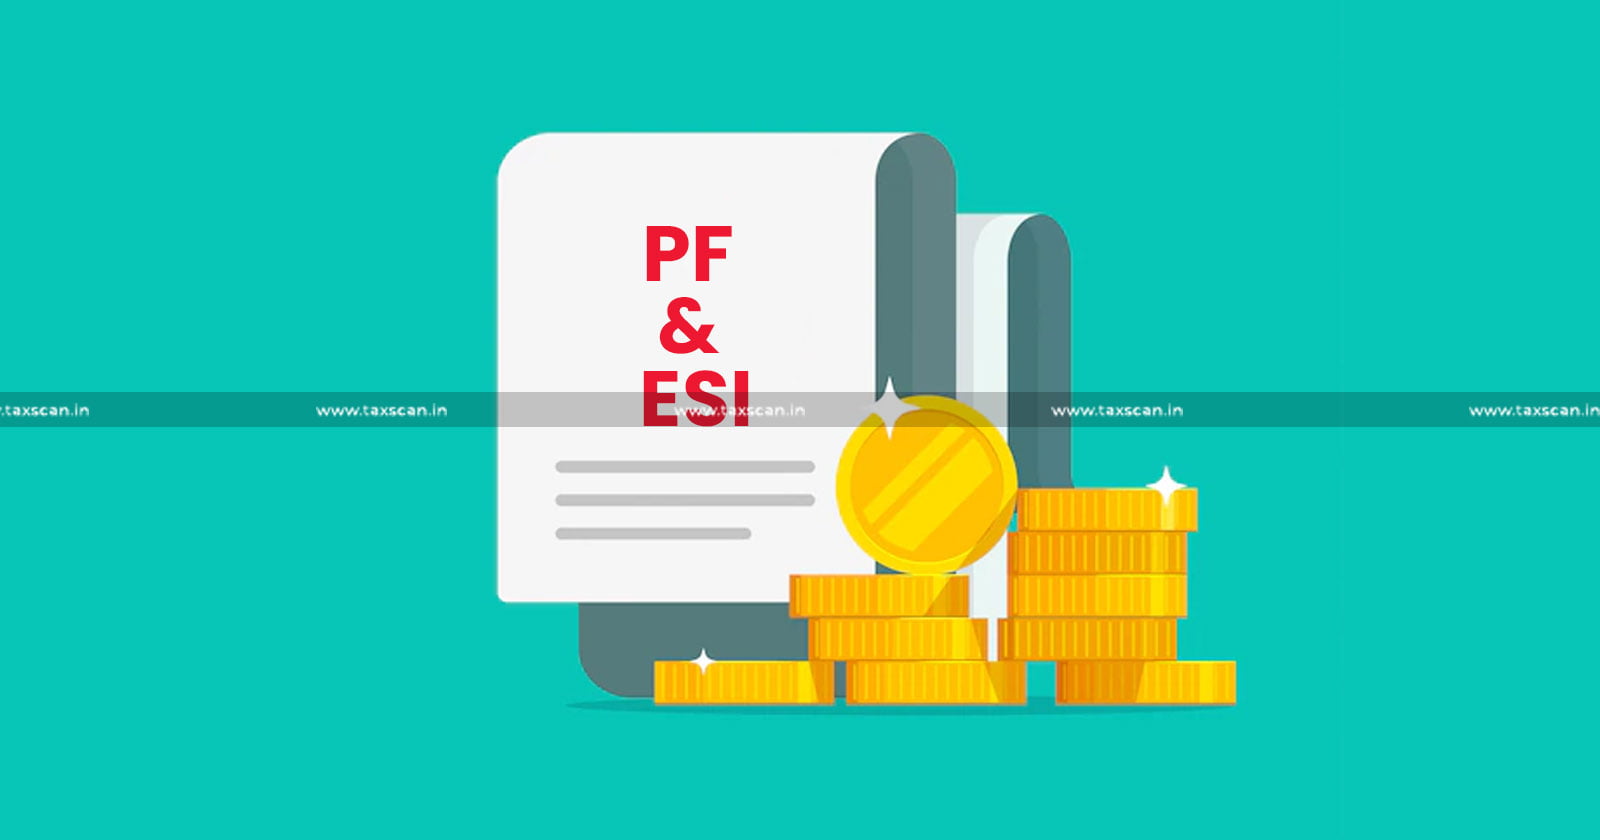 Deduction - Delayed Payment - Payment - Employee's Contribution on PF & ESI - PF - ESI - ROI - ITAT - TaxScan